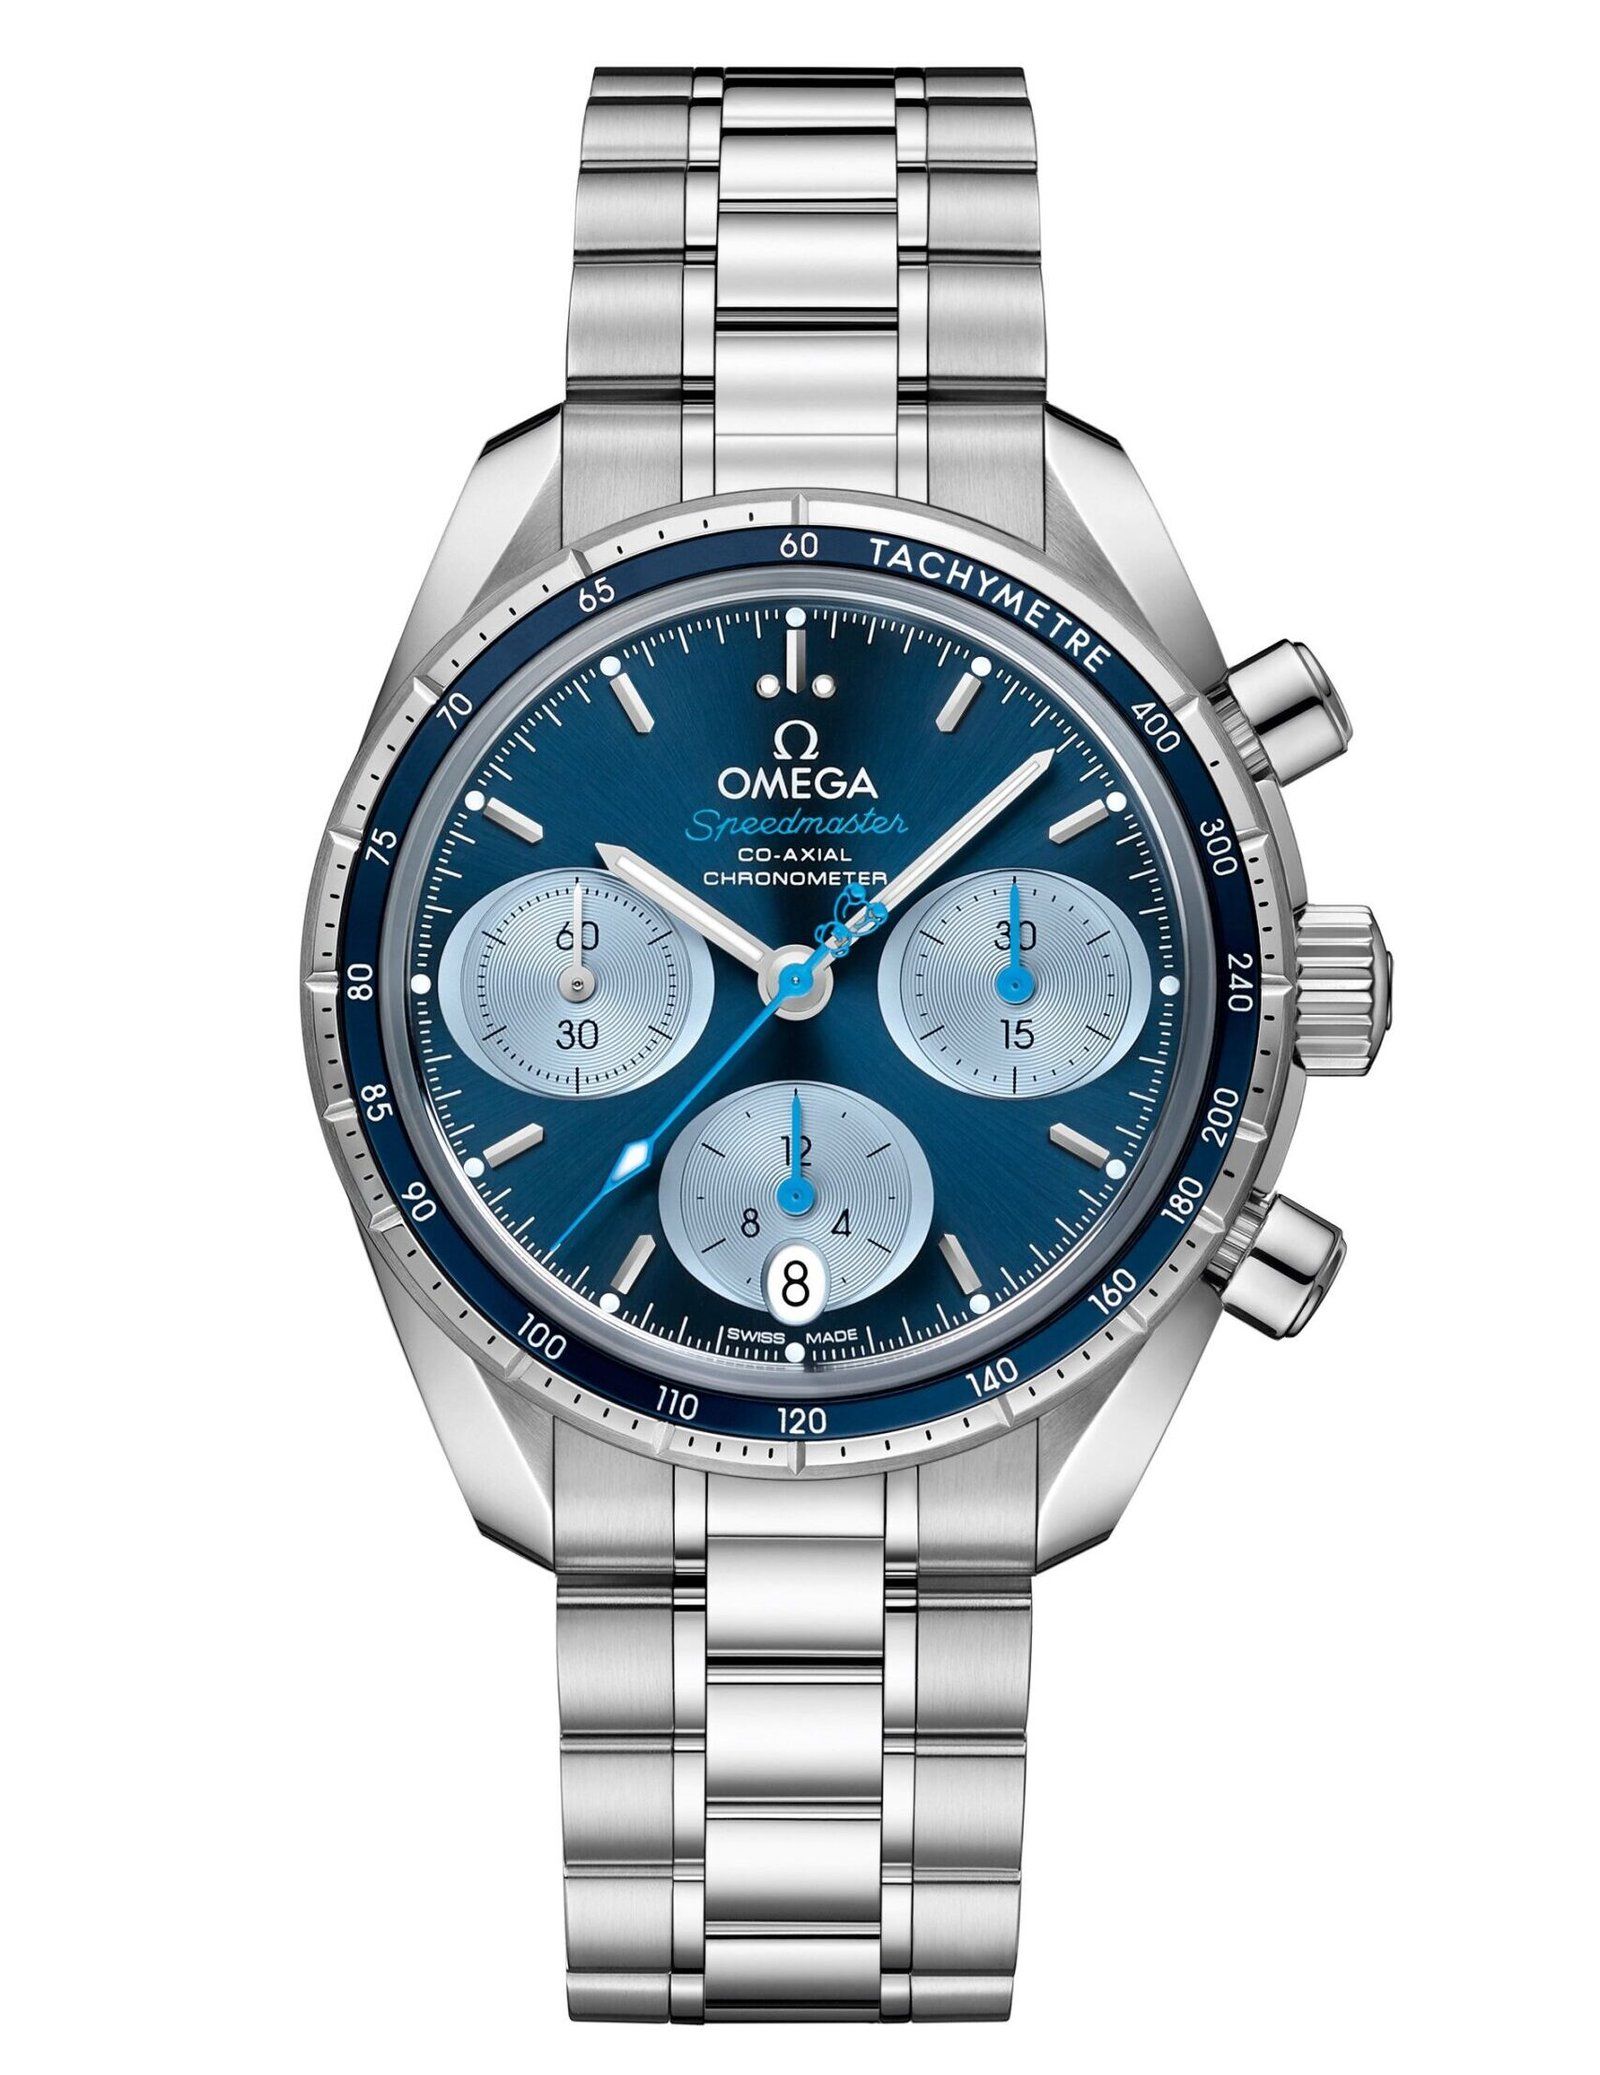 Omega De Ville watches specially created for this mission 